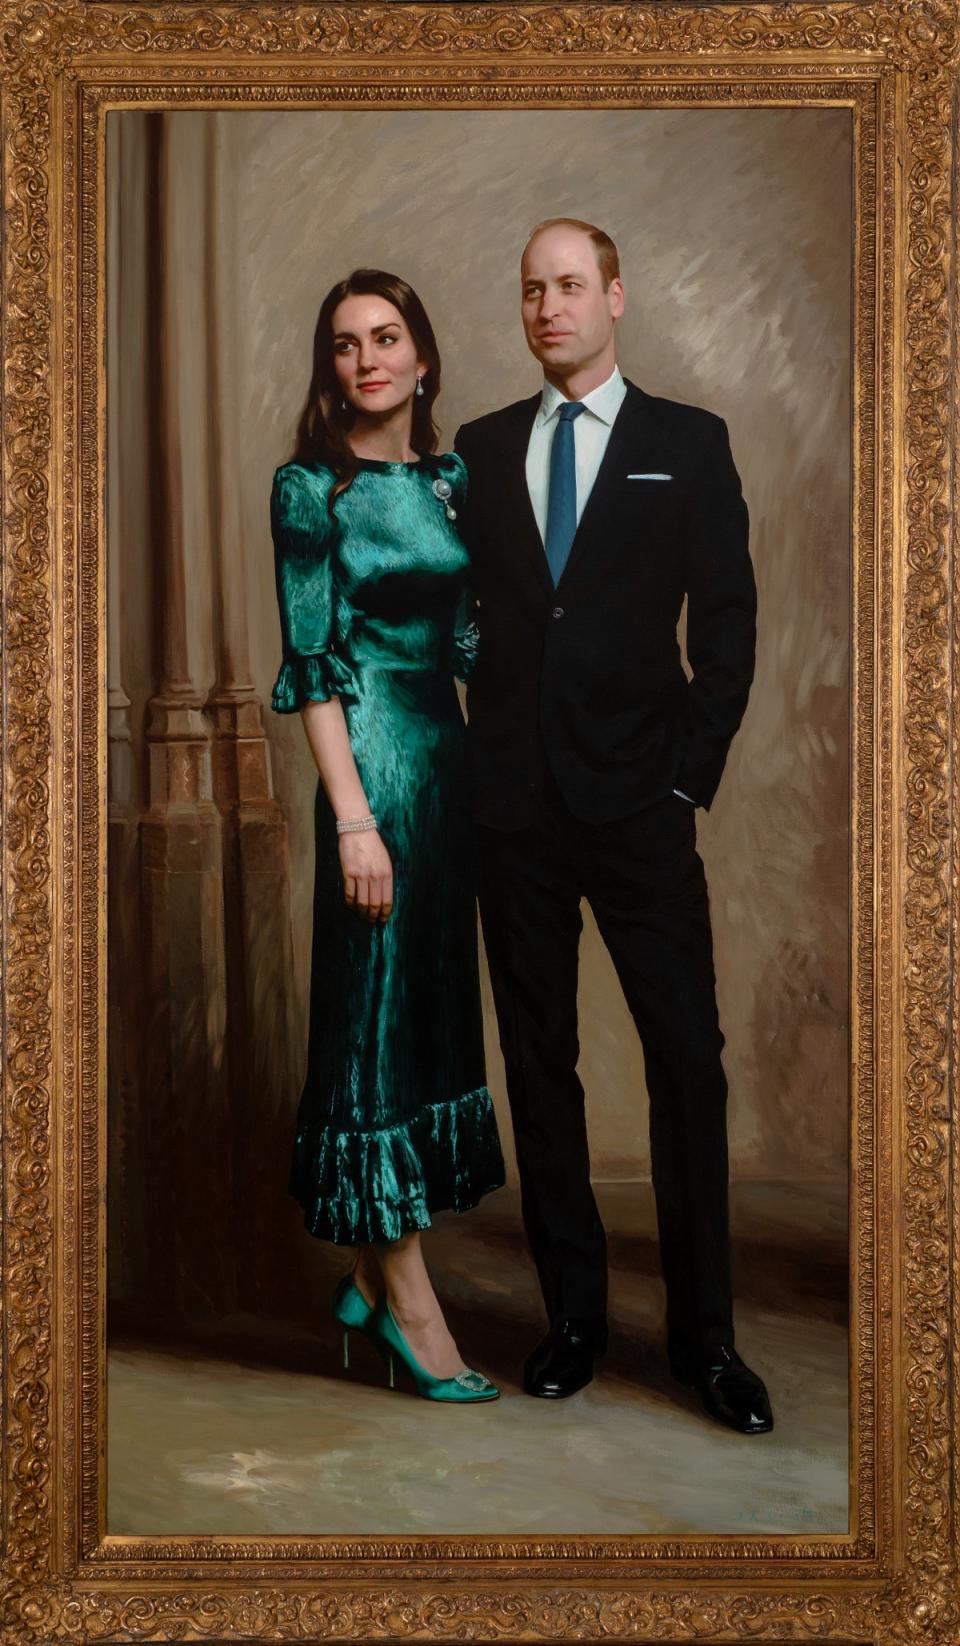 The new painting of Prince William and Kate Middleton (Jamie Coreth/Fine Art Commission)